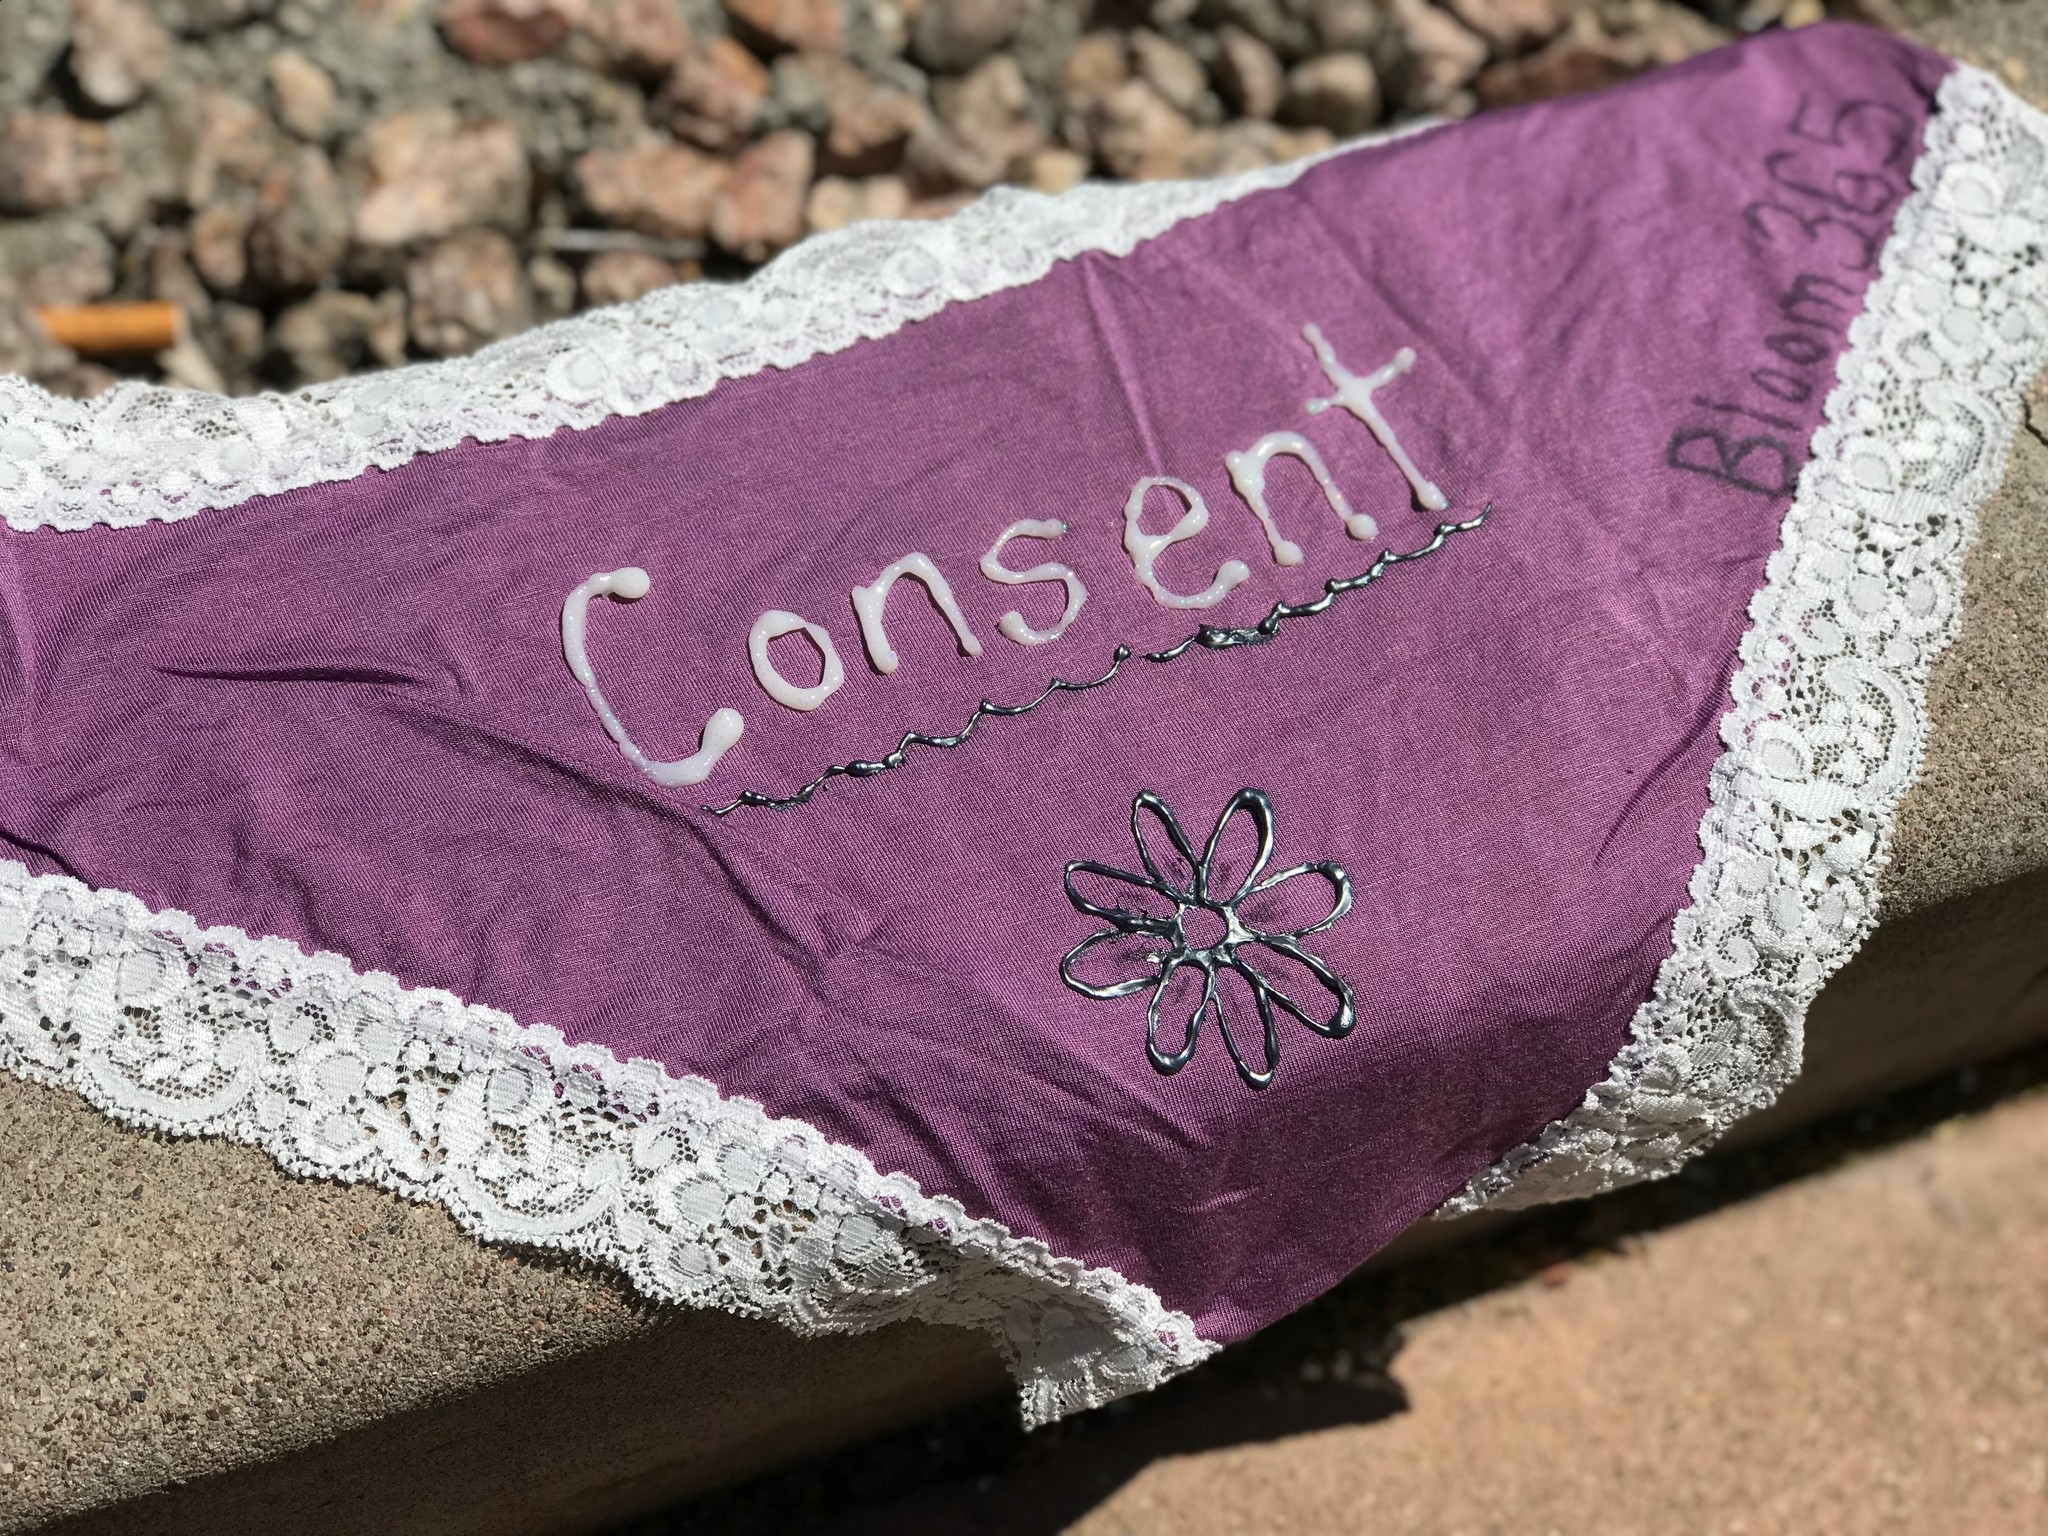 The Panty Project